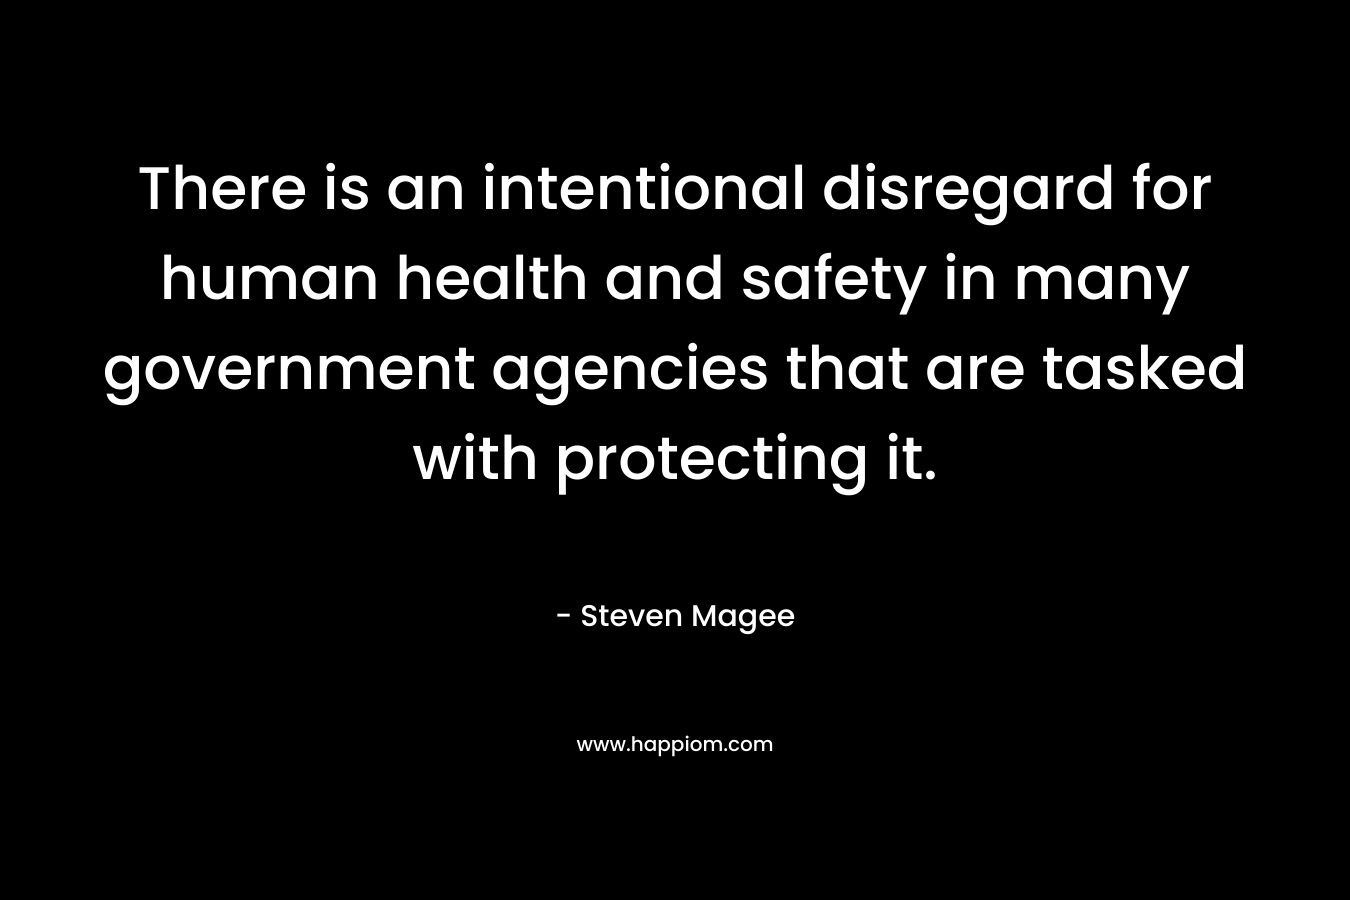 There is an intentional disregard for human health and safety in many government agencies that are tasked with protecting it.